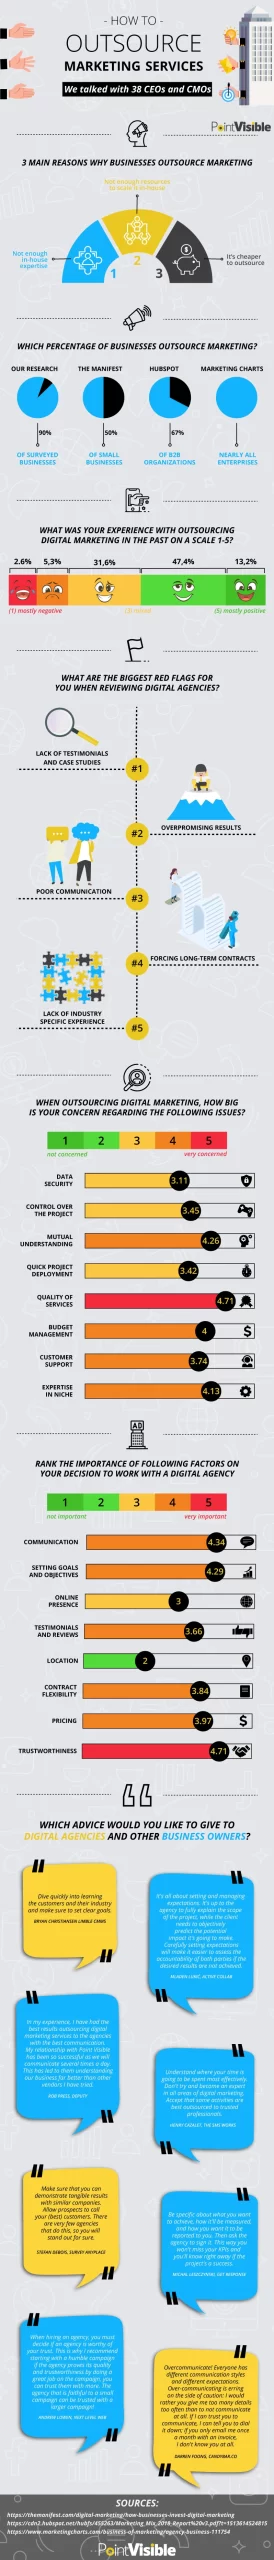 Infographic showing different statistics about outsourcing link building.